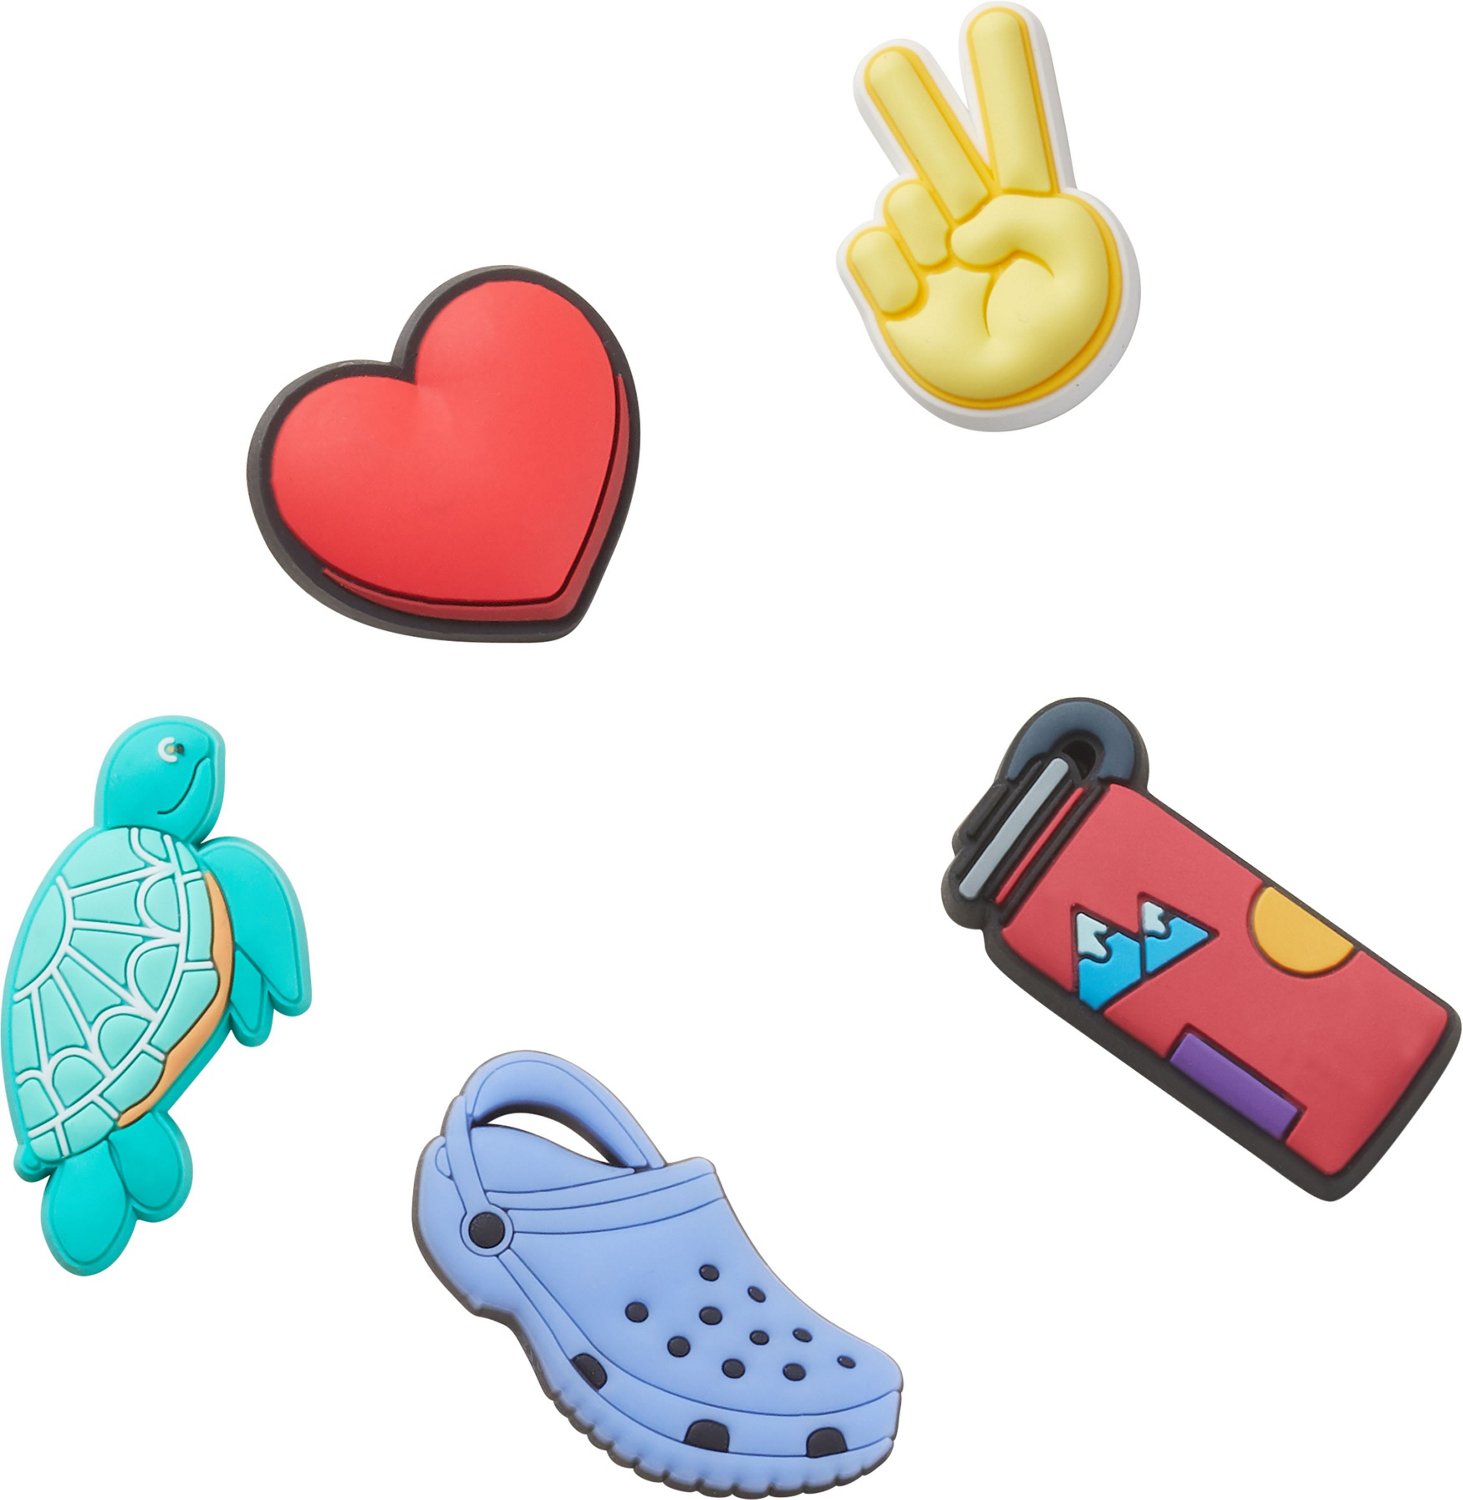 Charms for Crocs — Learning Express Gifts